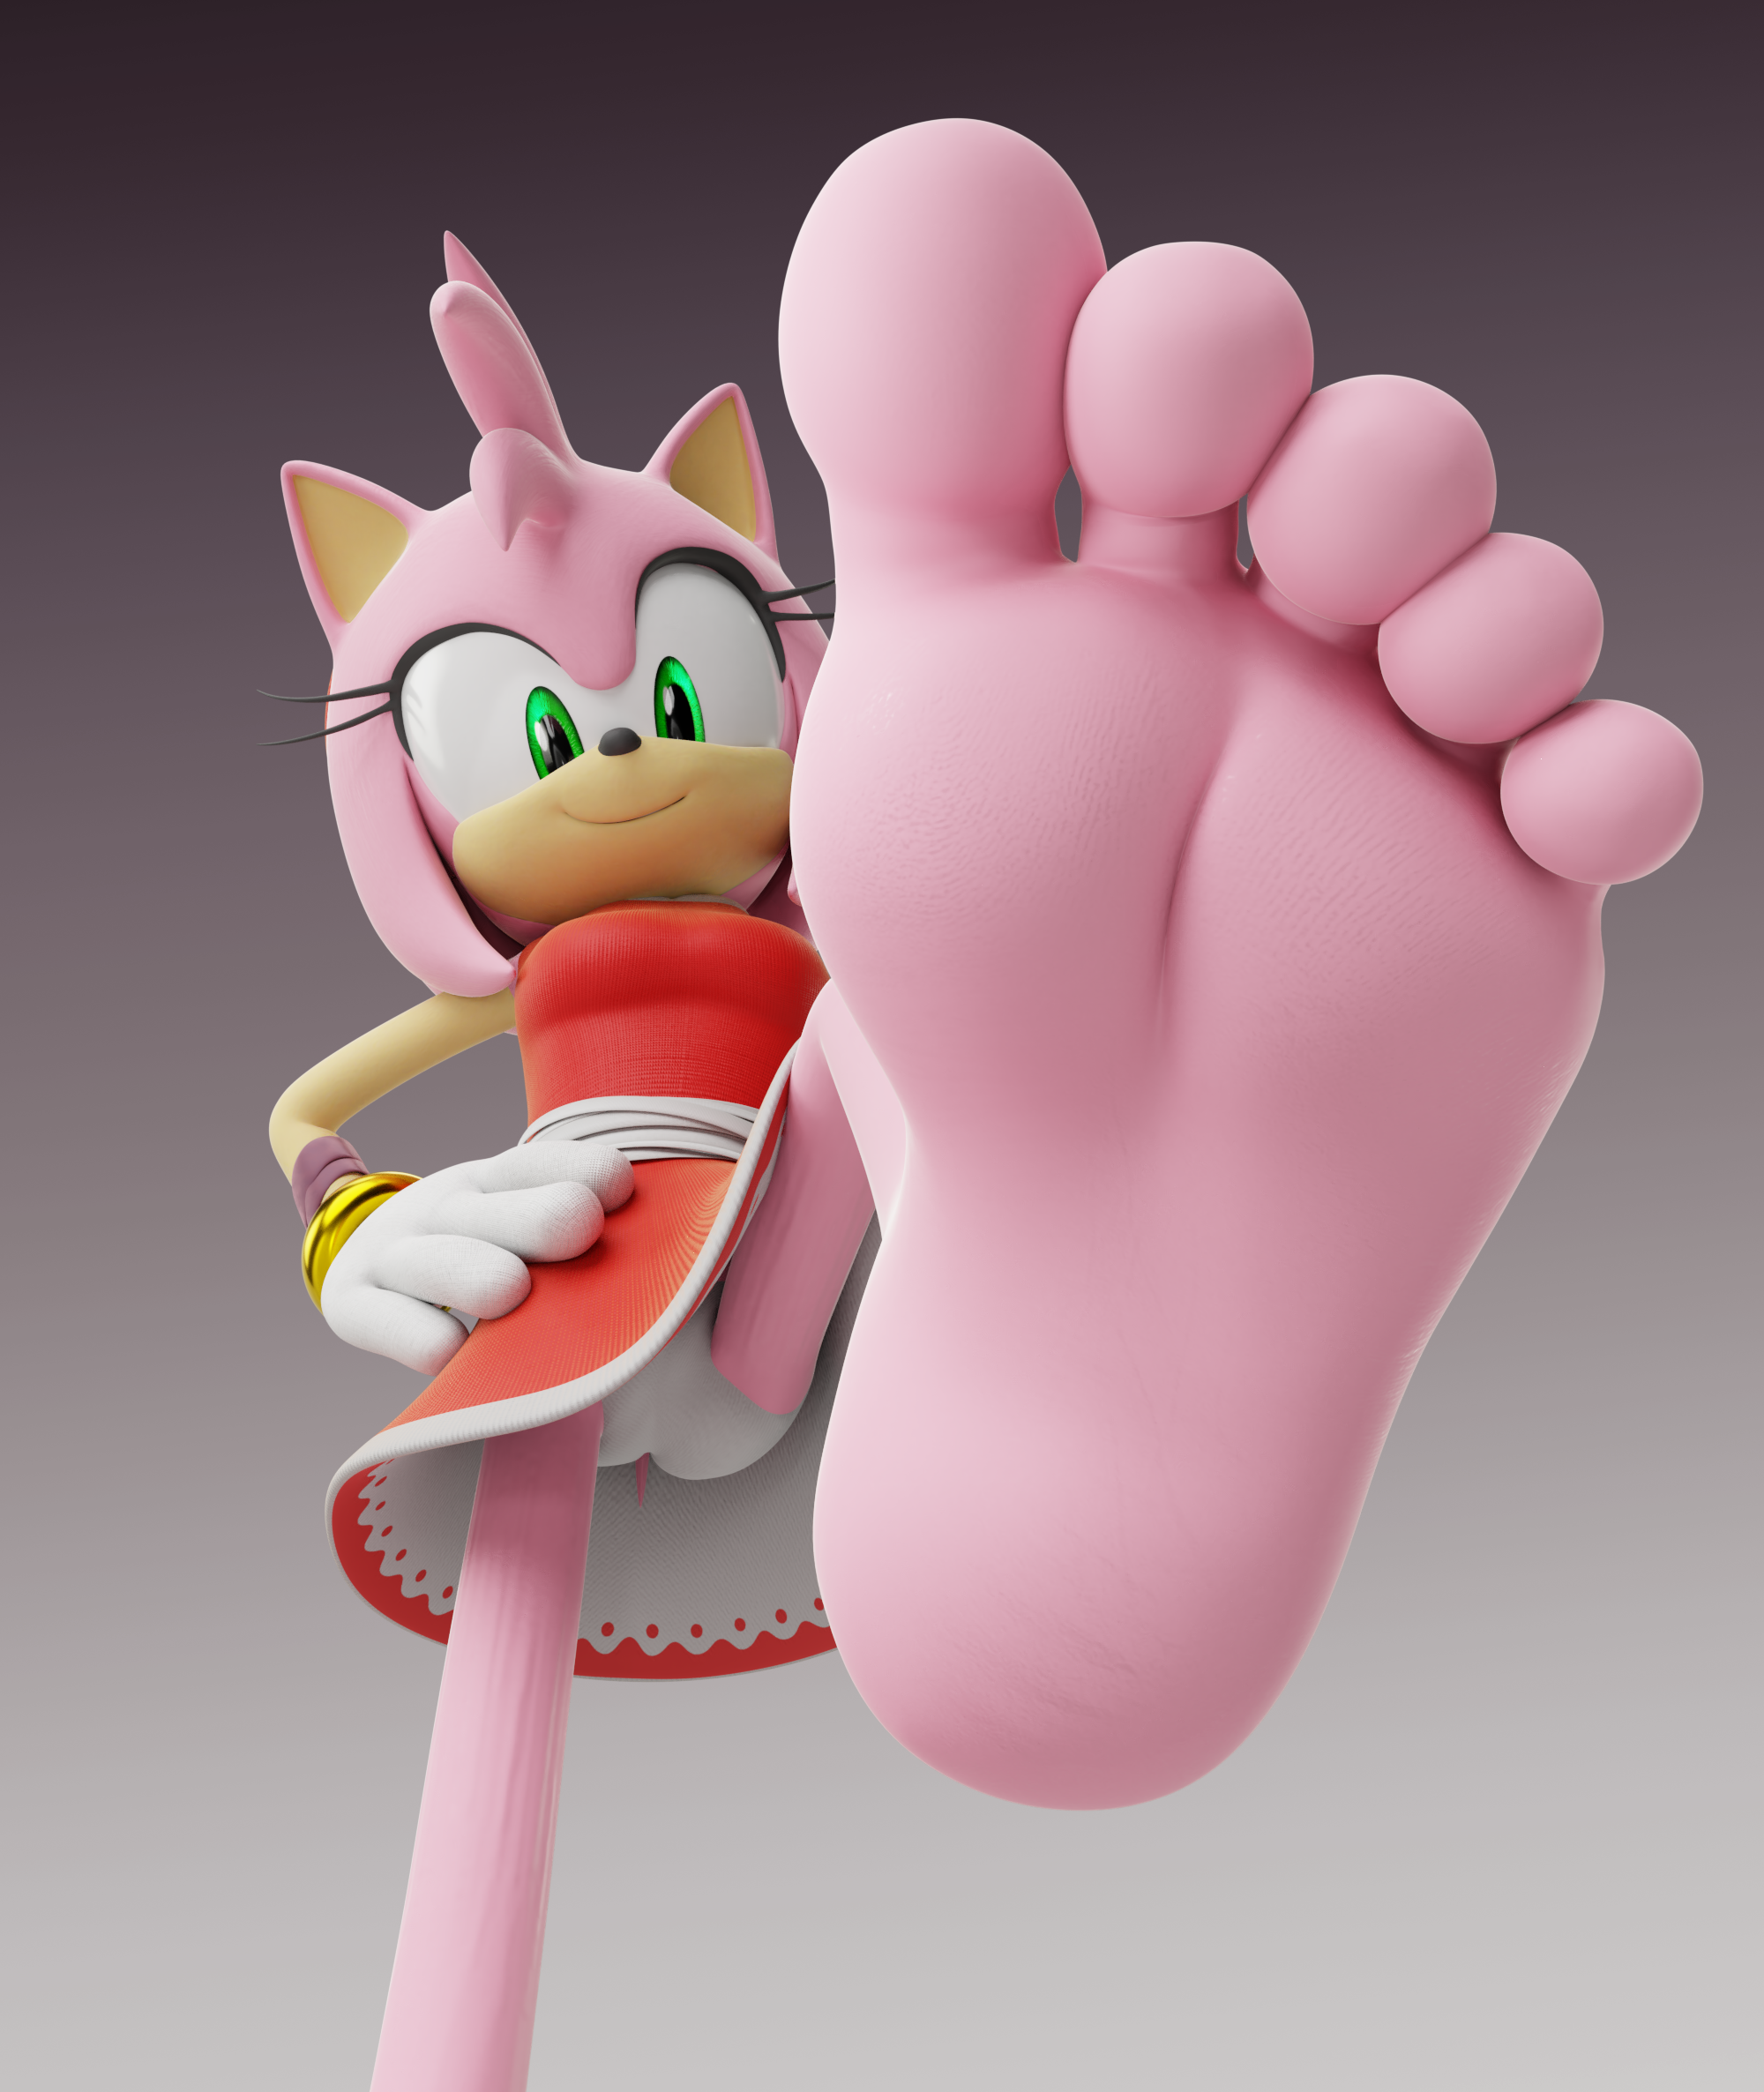 Amy Rose, Wiki Sonic Legends TV